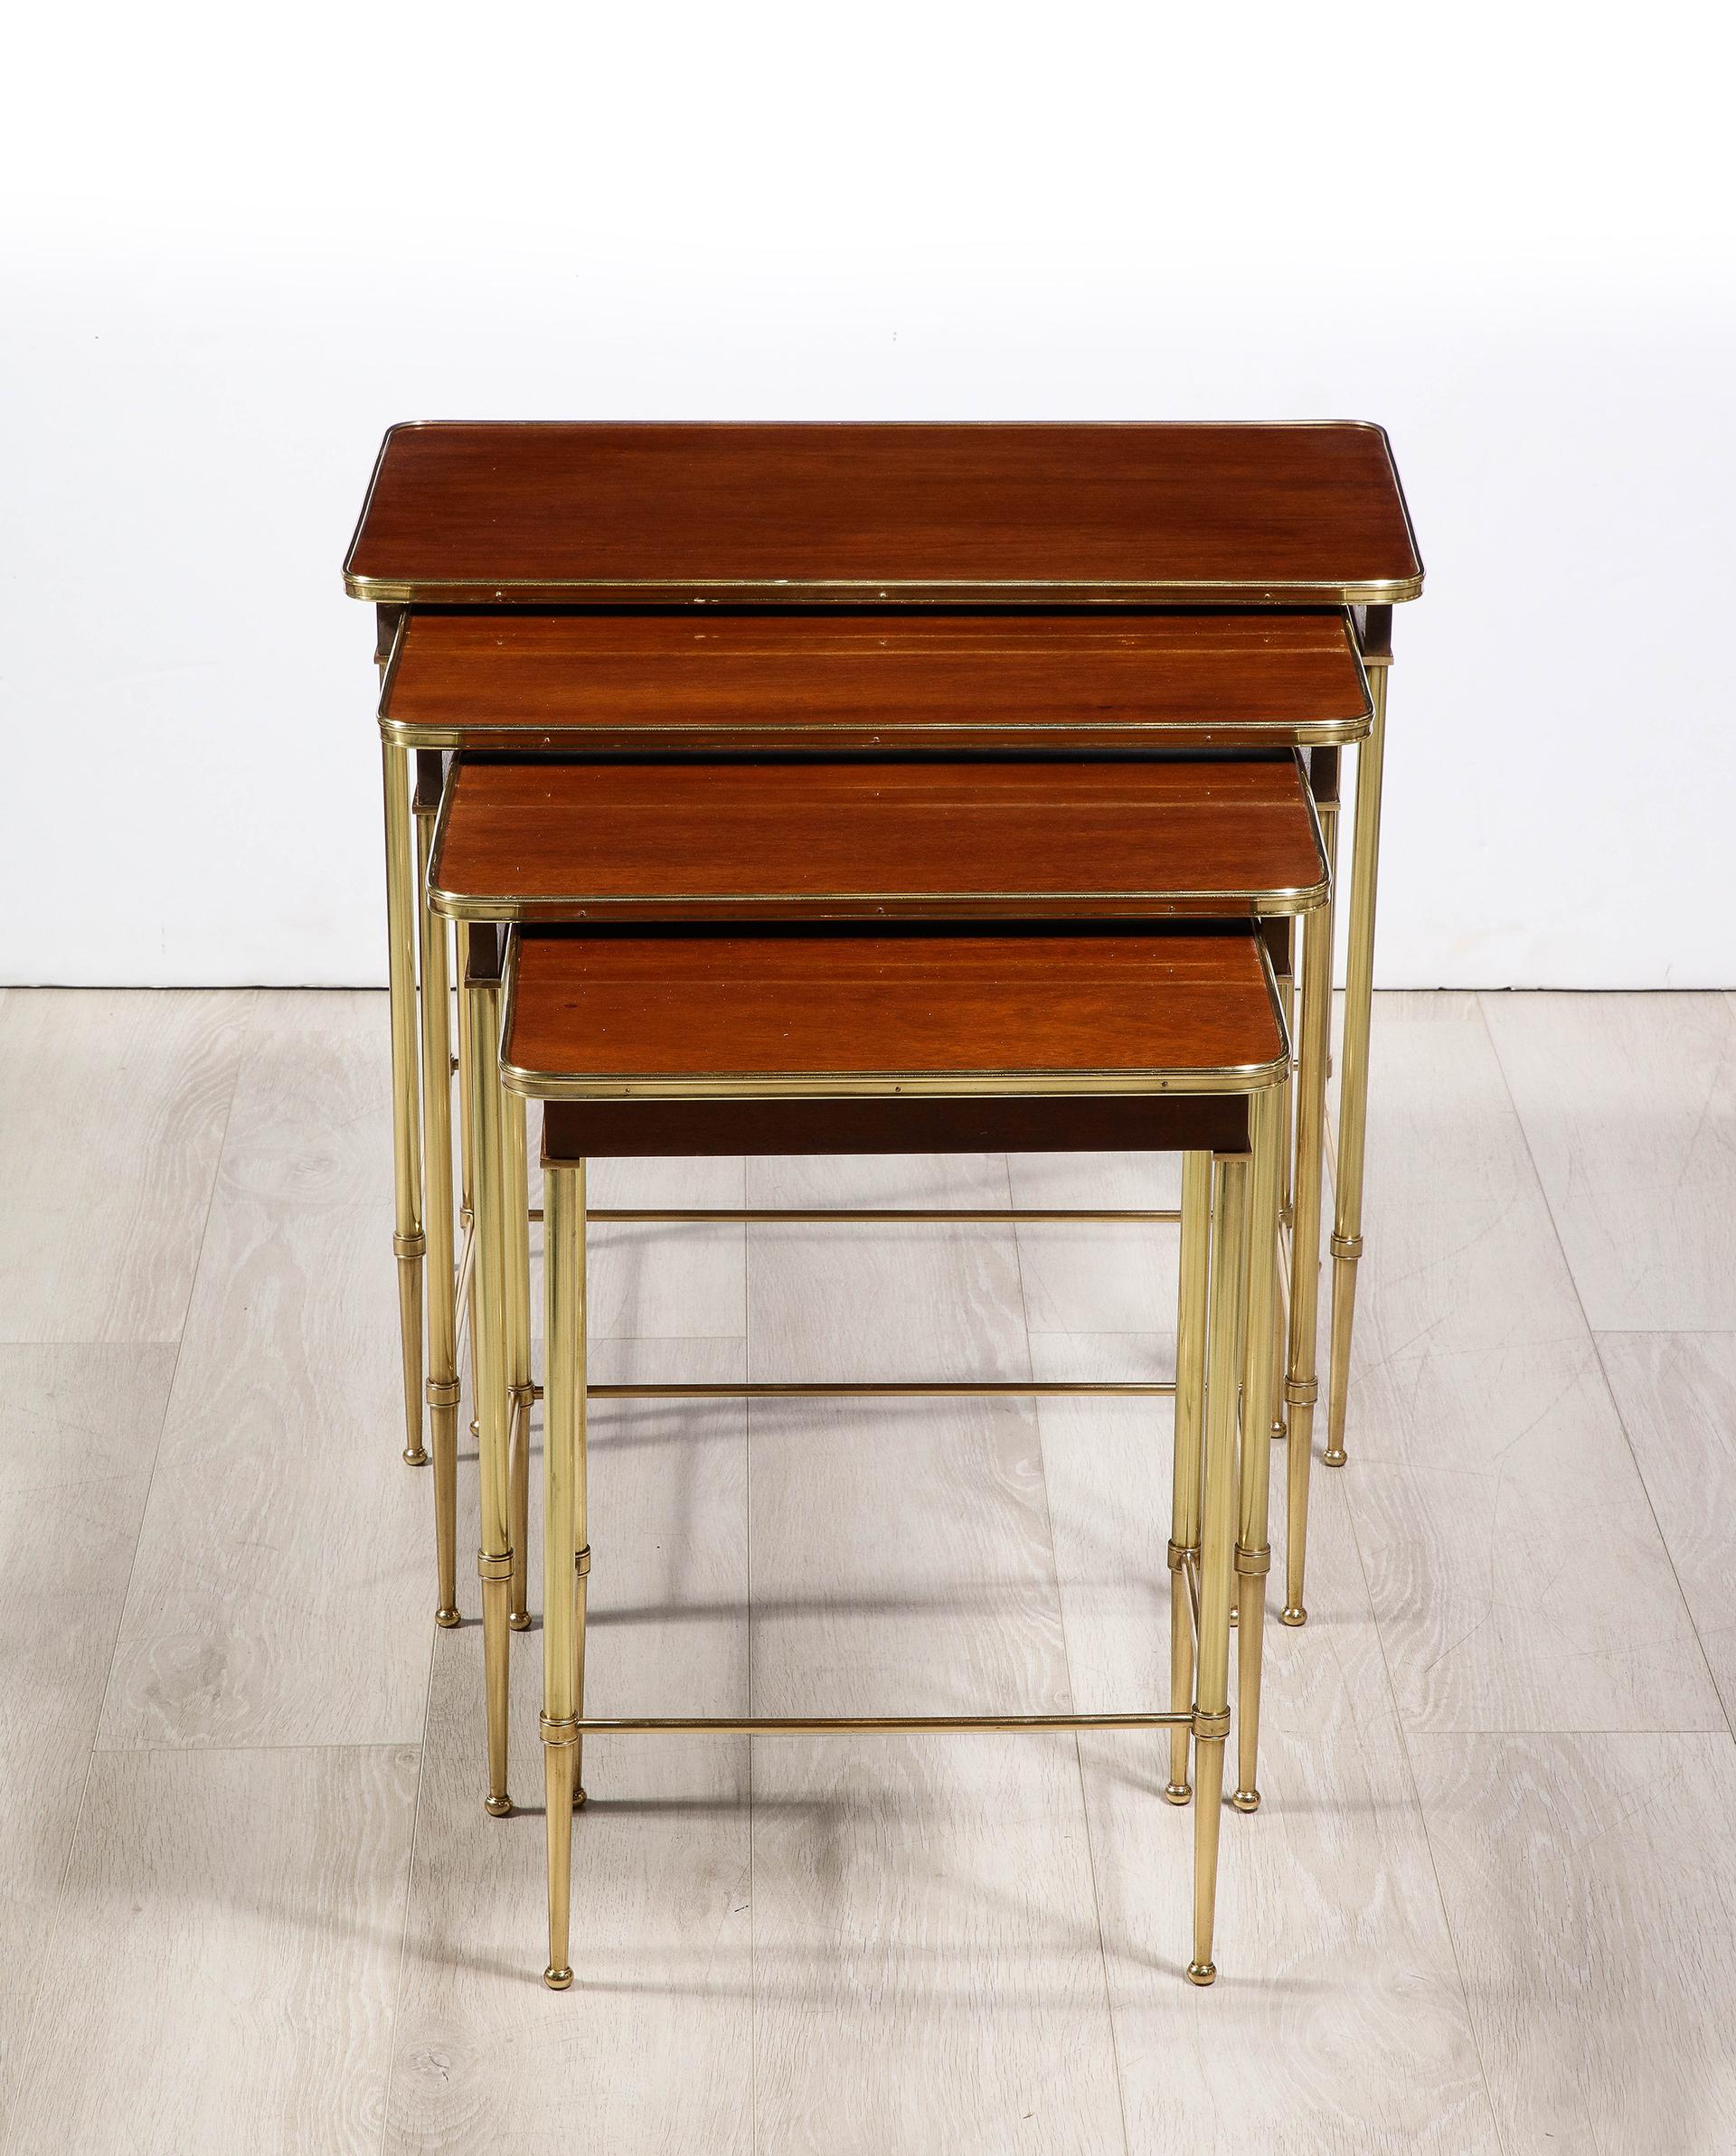 Set of 4 Mahogany and Brass Nesting Tables by Maison Jansen In Good Condition For Sale In New York, NY